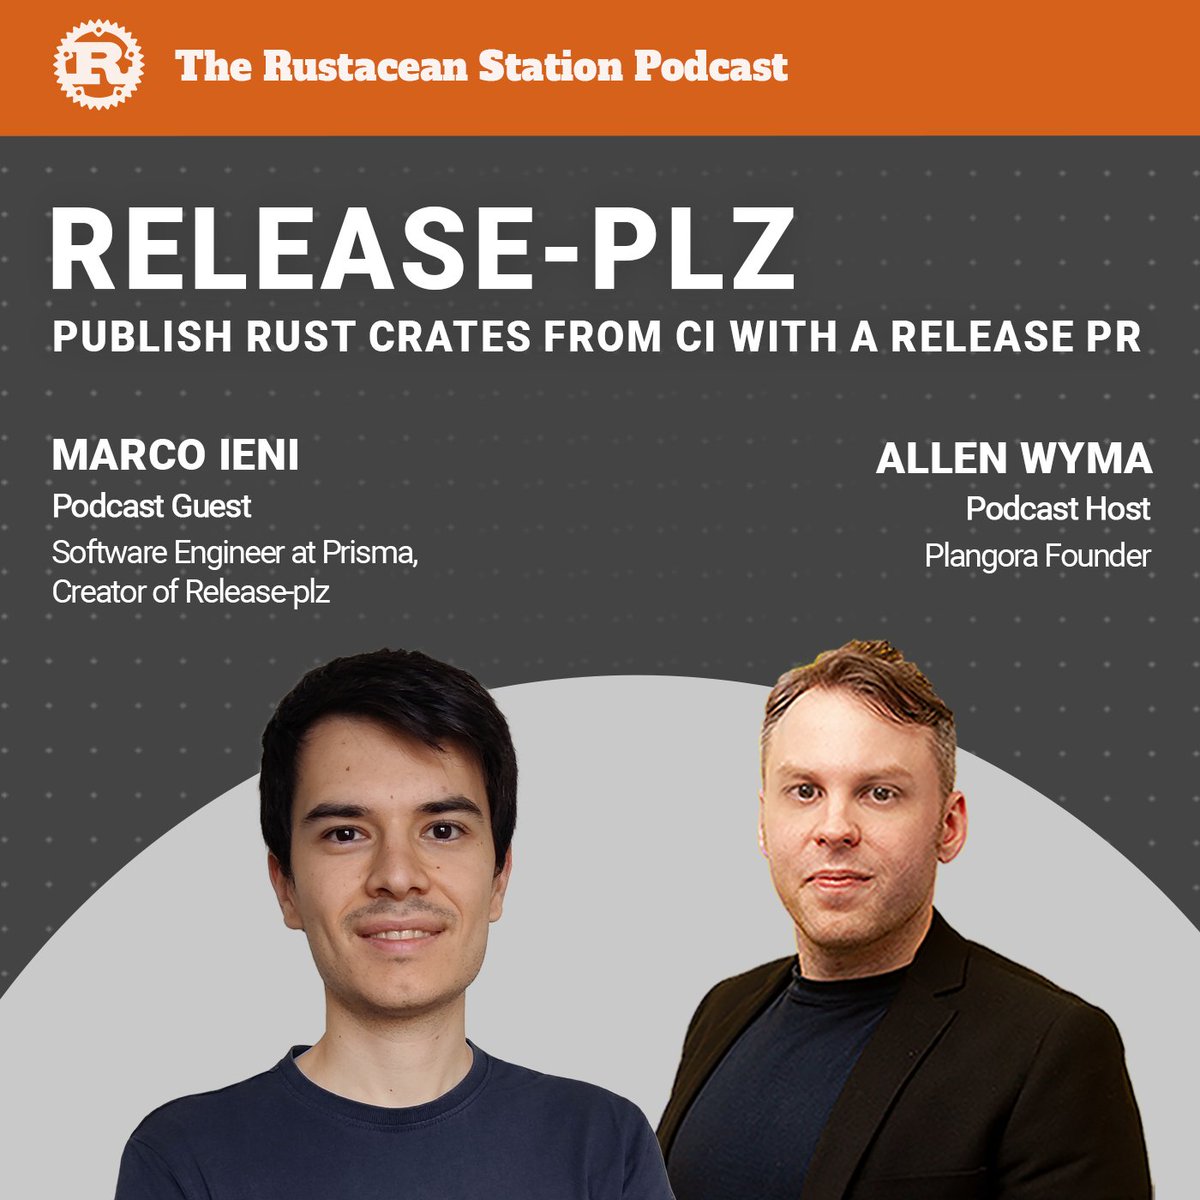 New episode is out on @rustaceanfm - join @allenwyma as he talks to @MarcoIeni about Release-plz, the tool Marco created for automated and conventional commits-based Rust releases. Learn about Release-plz' features, development, and what's on the horizon: rustacean-station.org/episode/marco-…